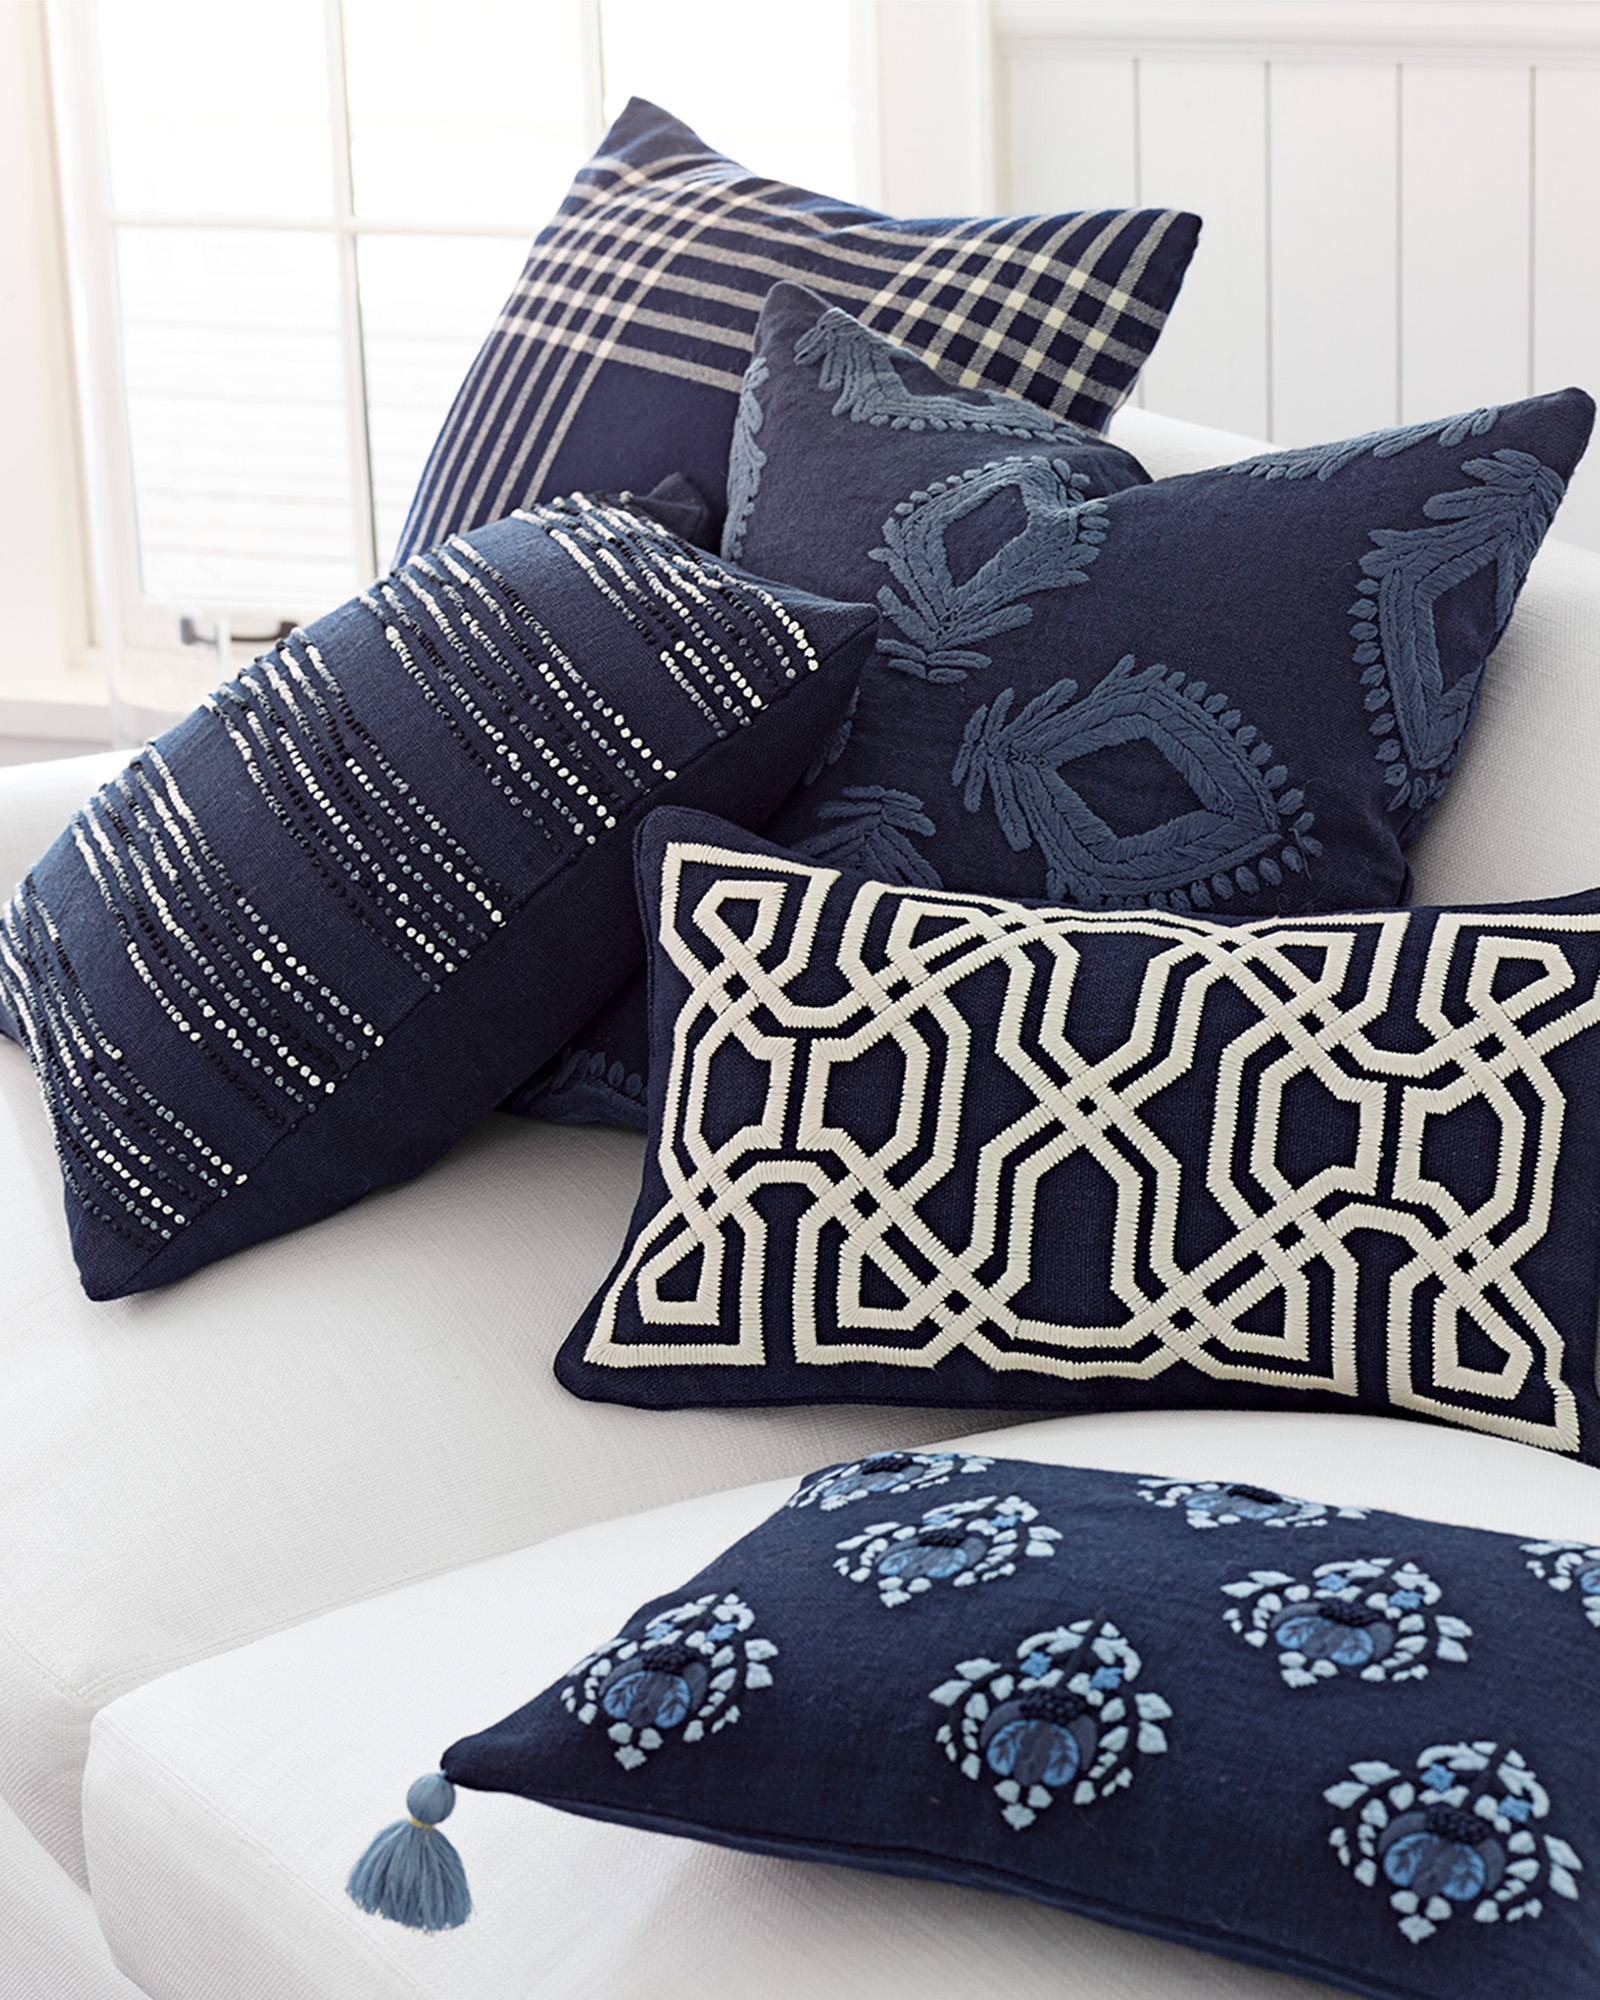 Leighton 24" SQ Pillow Cover - Midnight - Insert sold separately - Image 1